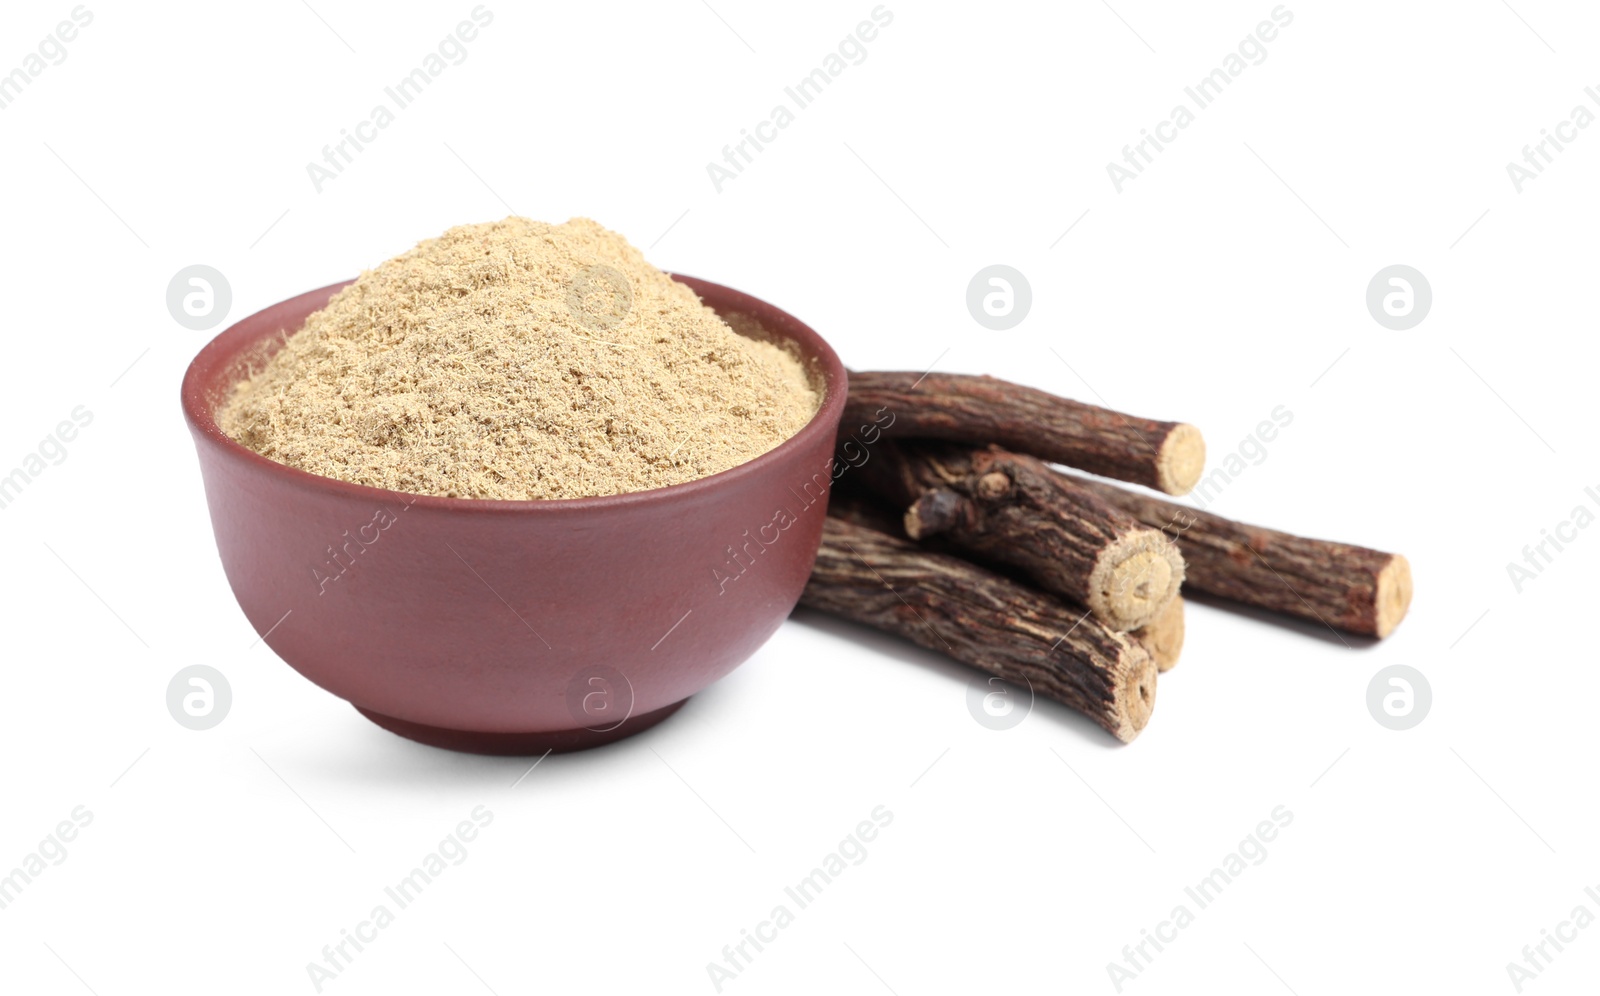 Photo of Powder in bowl and dried sticks of liquorice root on white background